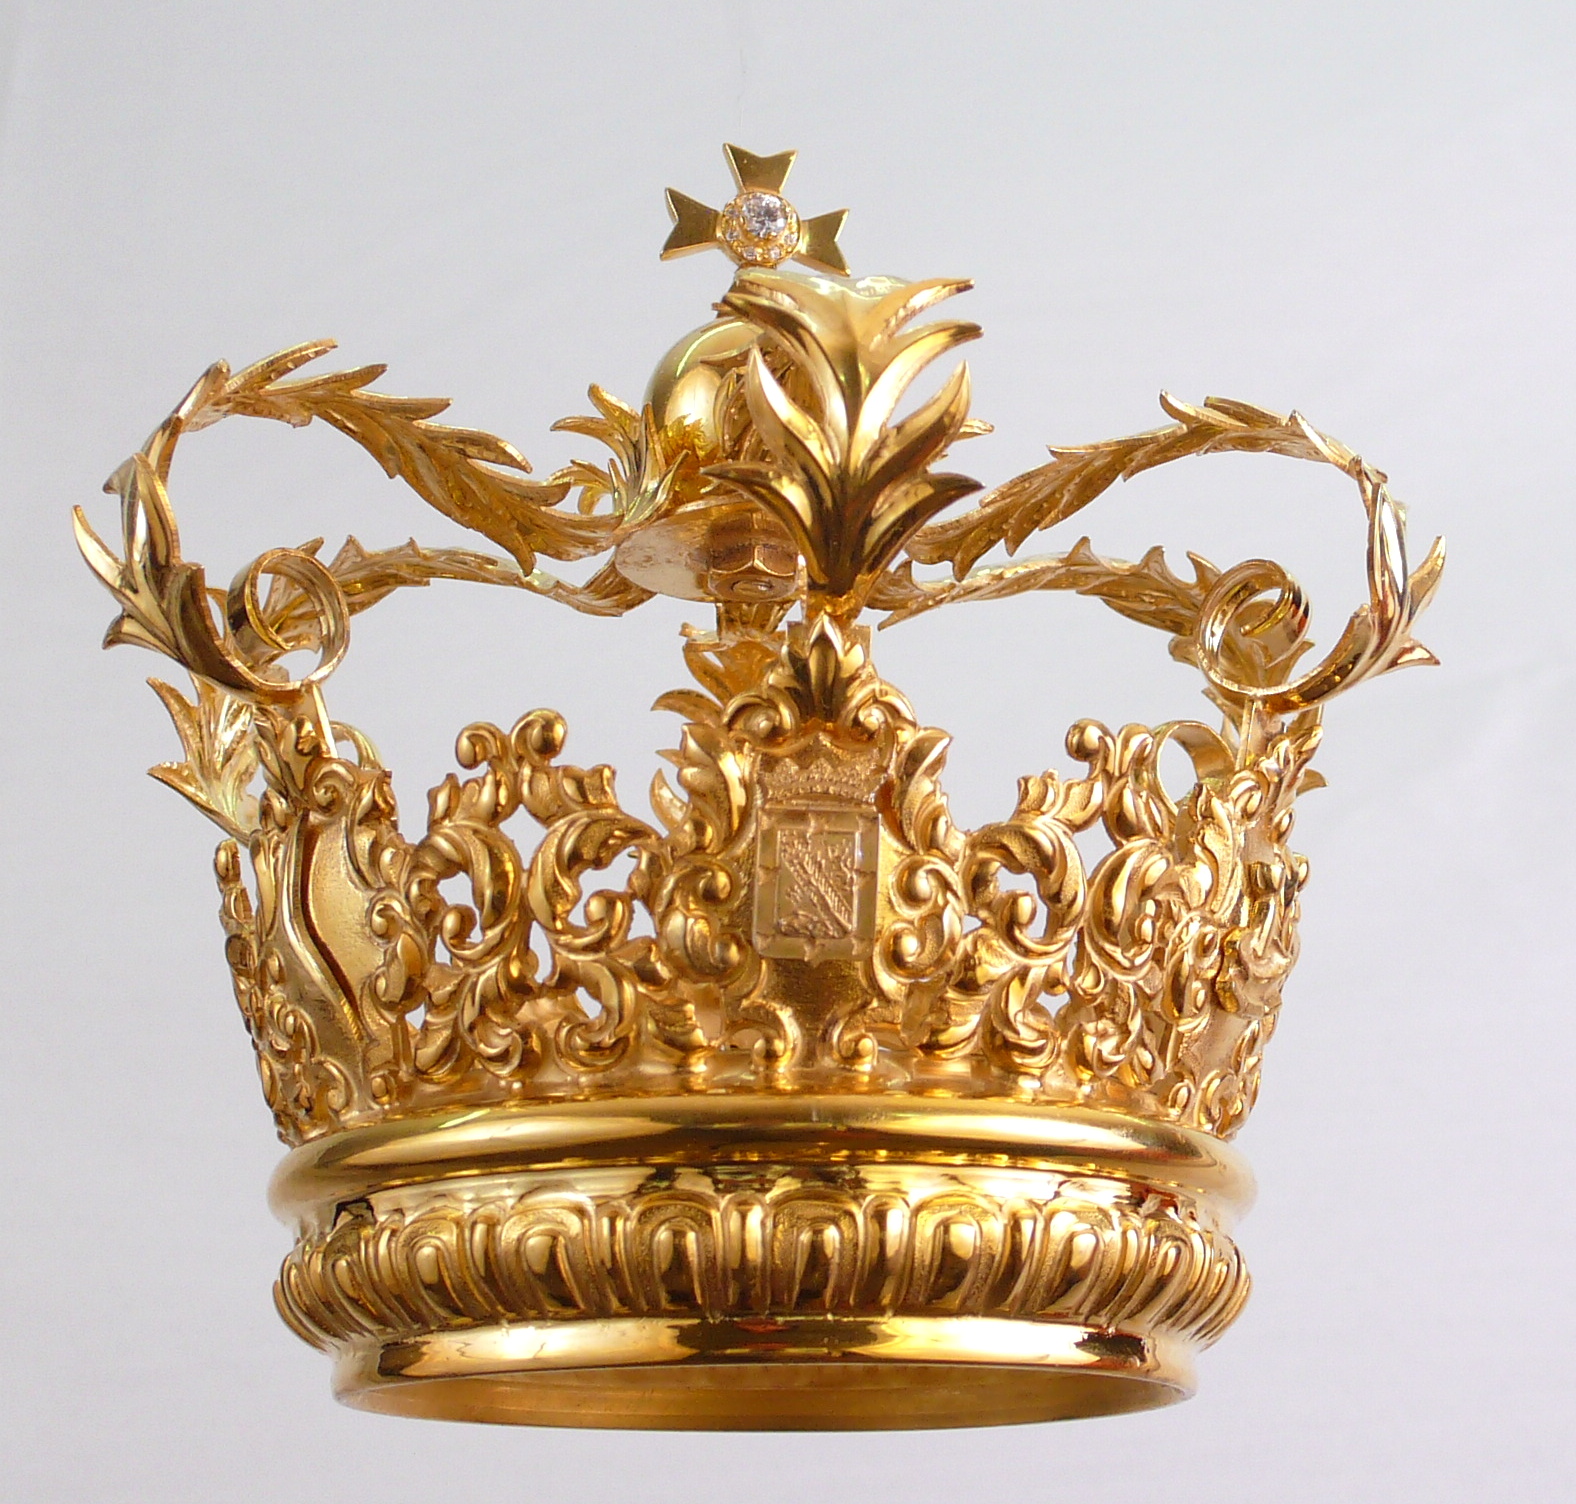 a golden crown with leaf designs is suspended from the ceiling